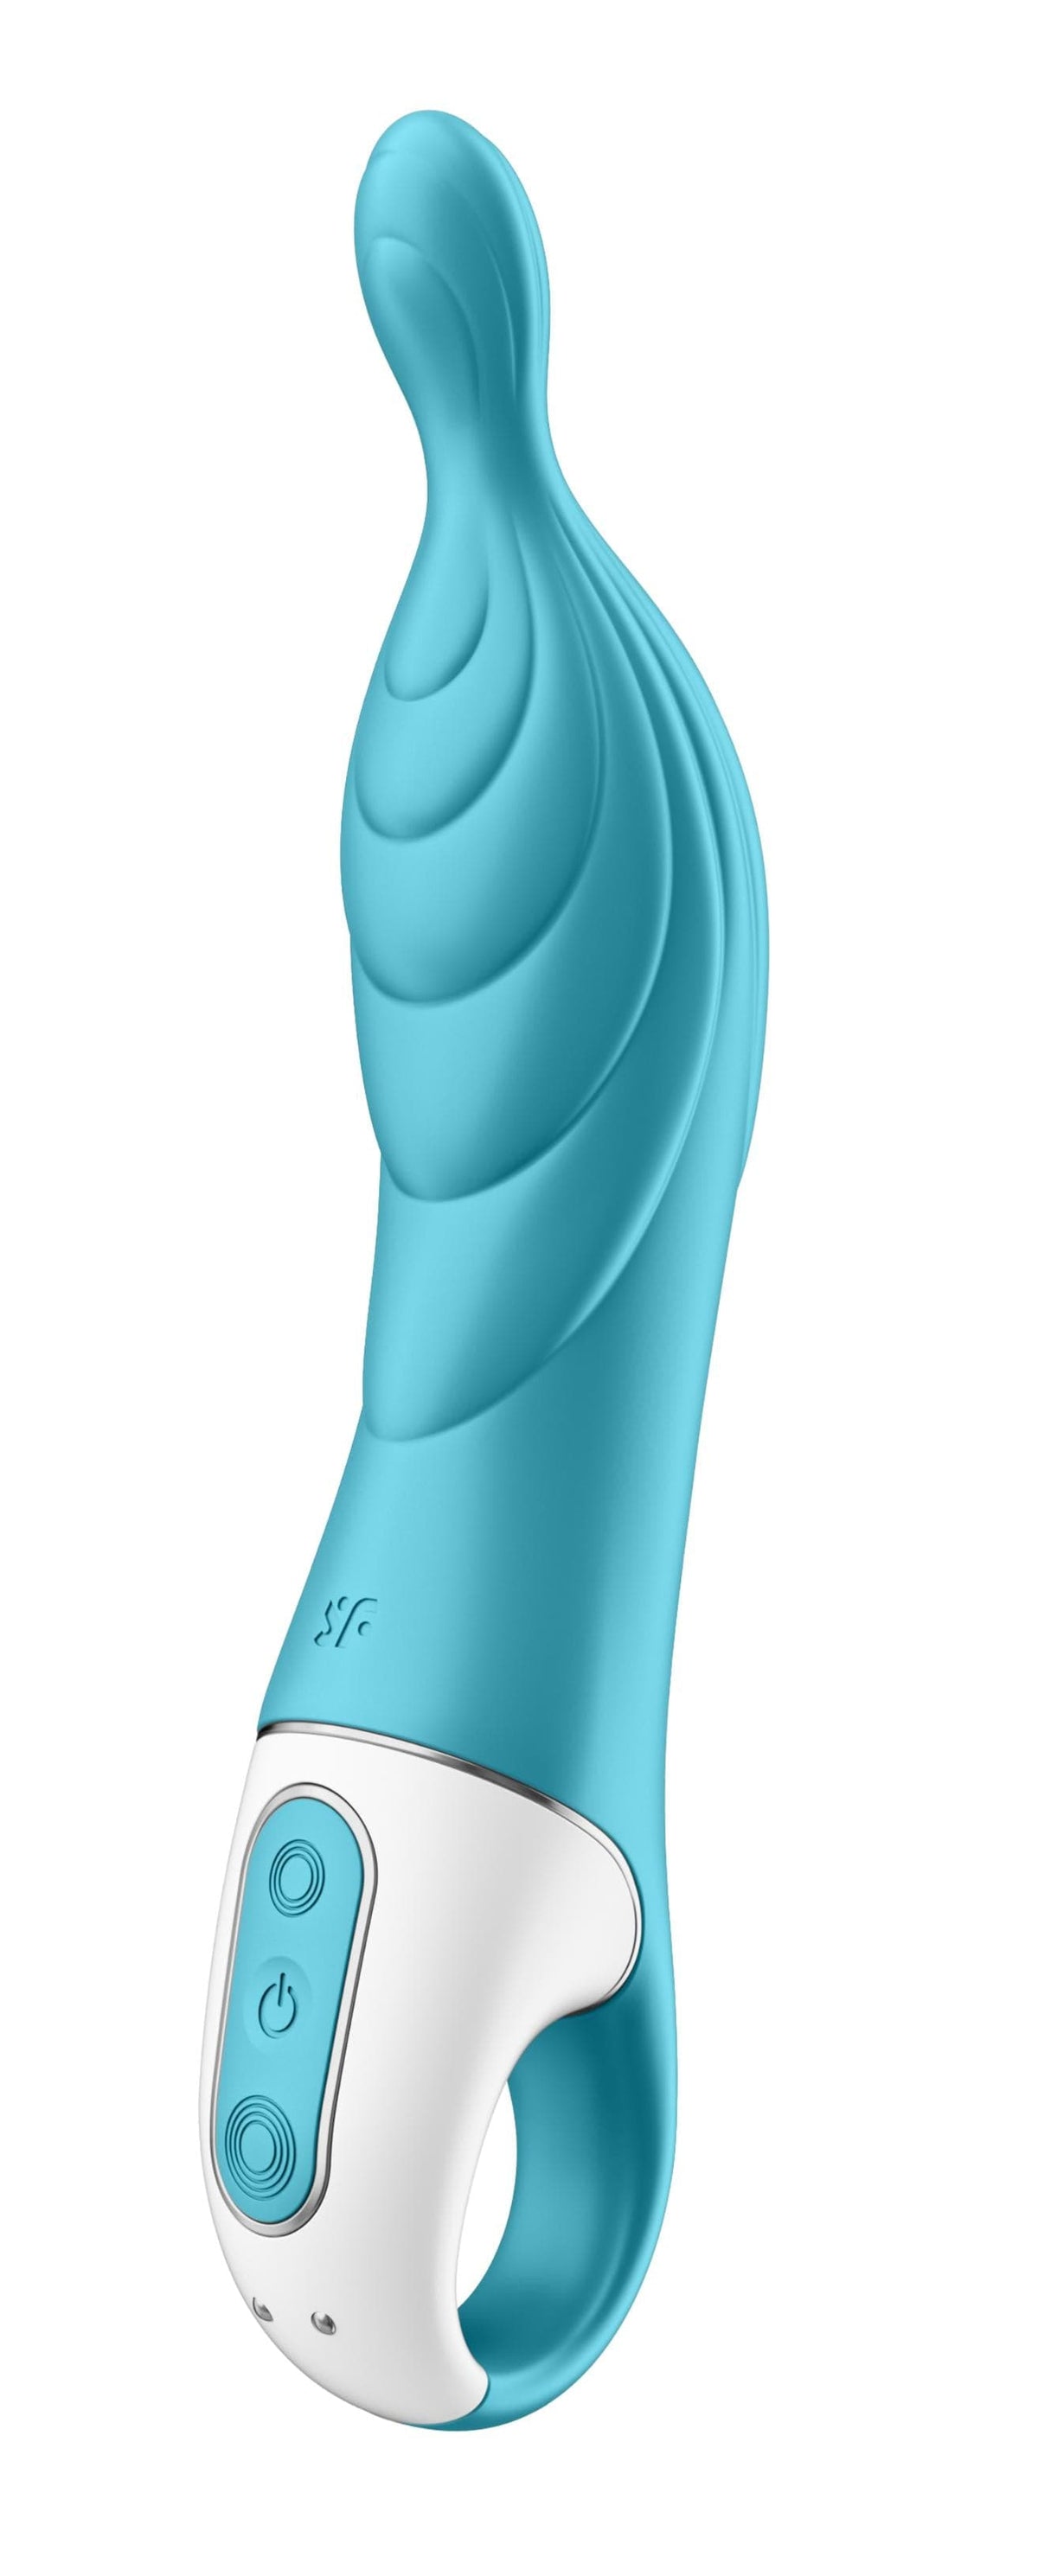 a mazing 2 a spot vibrator turquoise turquoise